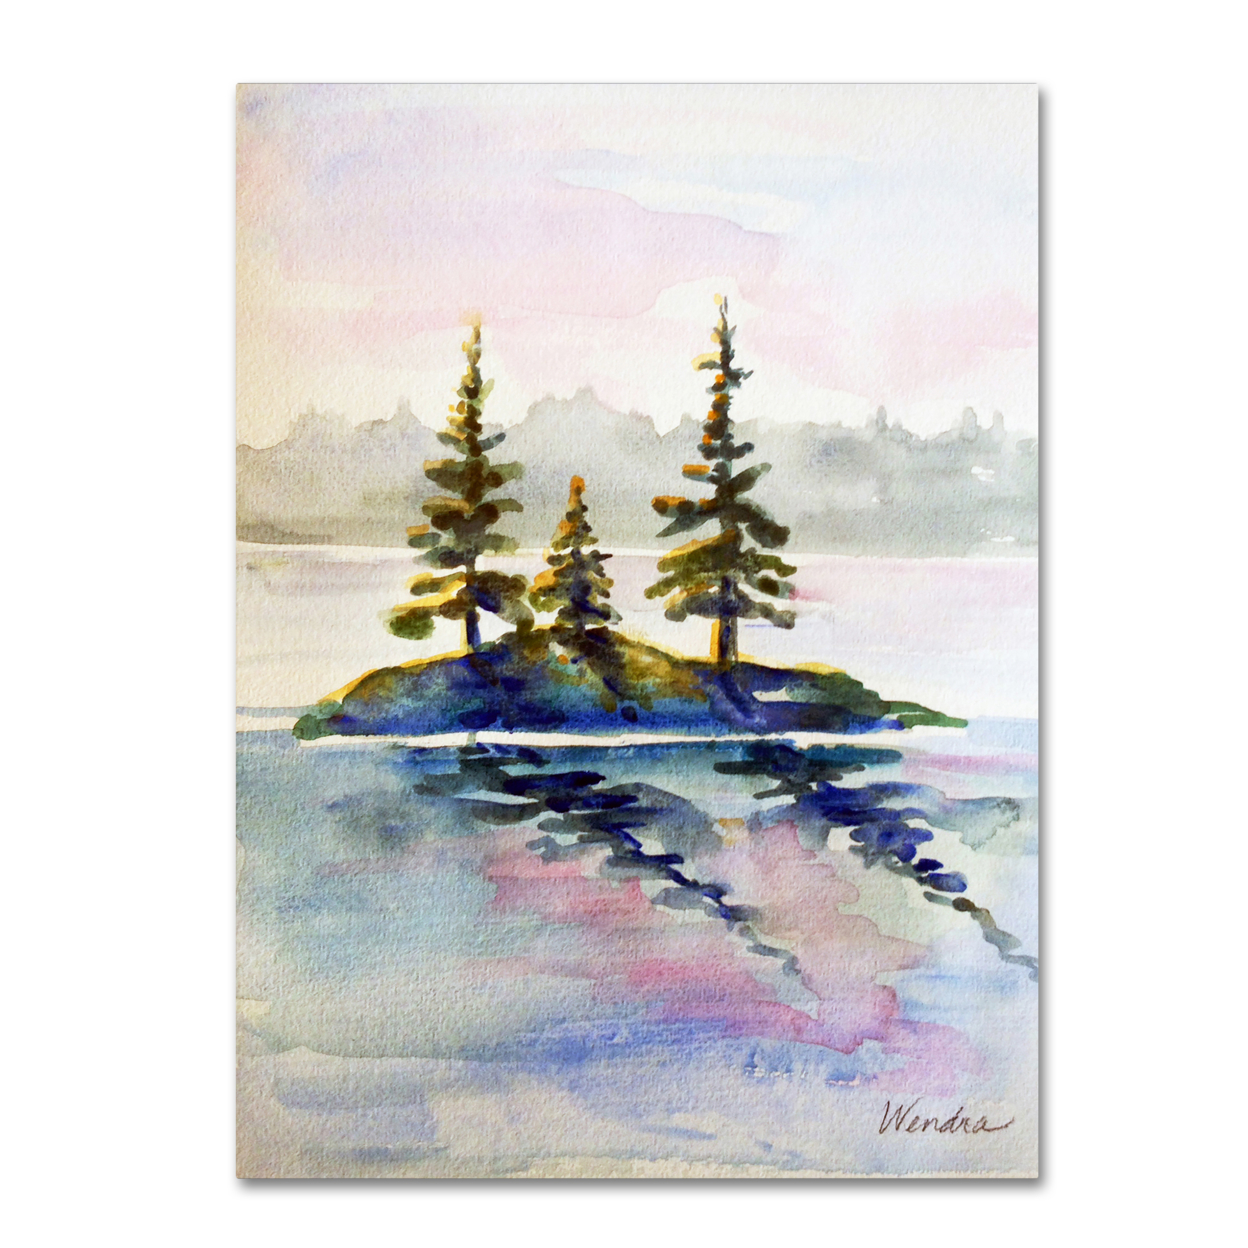 Wendra 'Little Island' Canvas Wall Art 35 X 47 Inches